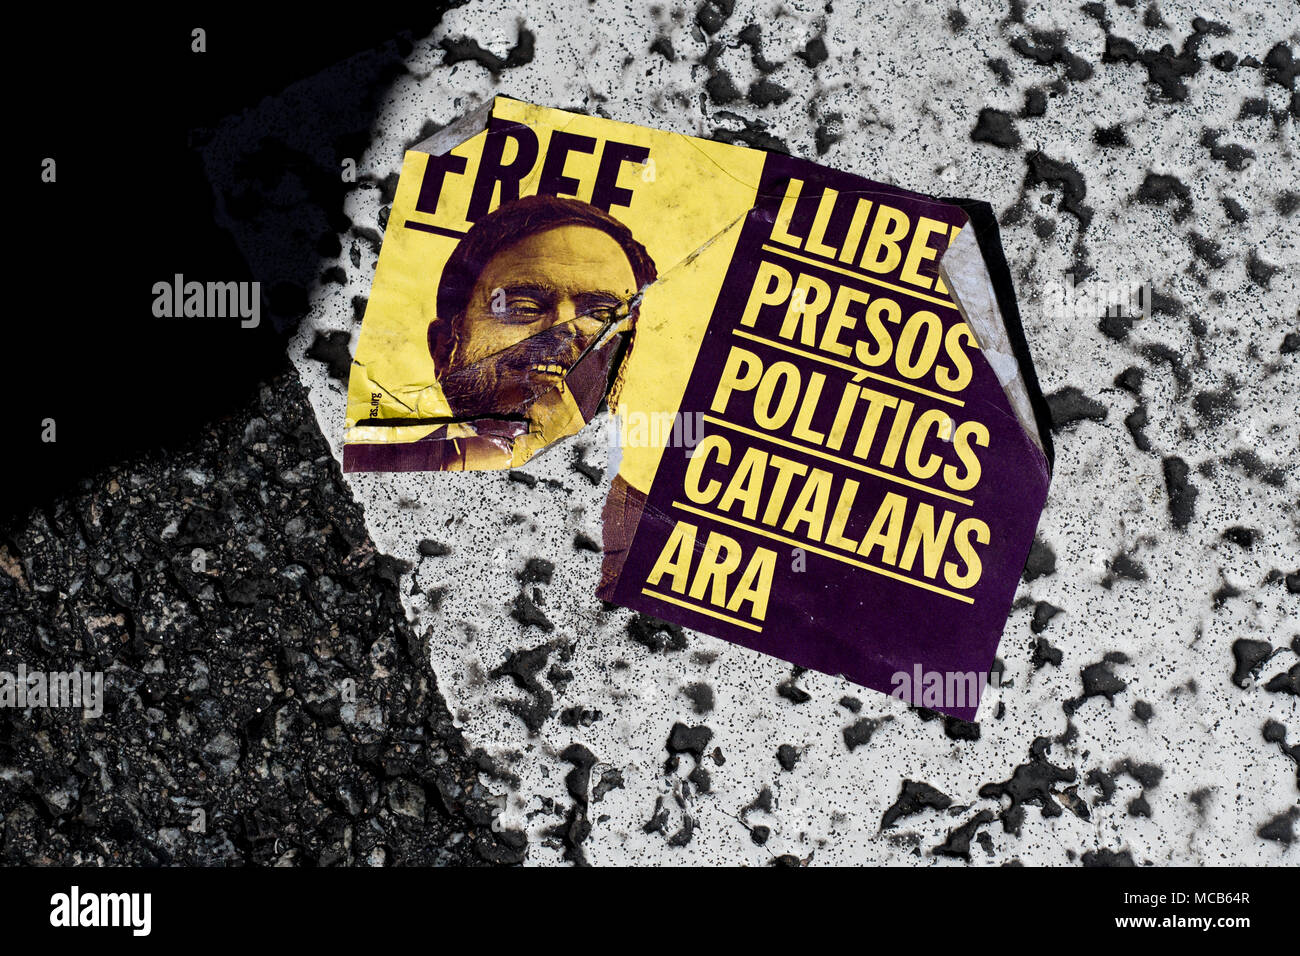 Barcelona, Catalonia, Spain. 15th Apr, 2018. A sticker showing the image of former Catalan vice-president ORIOL JUNQUERAS and a slogan reading 'freedom Catalan political prisioners now'. Hundreds of thousands pro-independence supporters march by the streets of Barcelona demanding the release of imprisoned Catalan leaders. Credit: Jordi Boixareu/ZUMA Wire/Alamy Live News Stock Photo